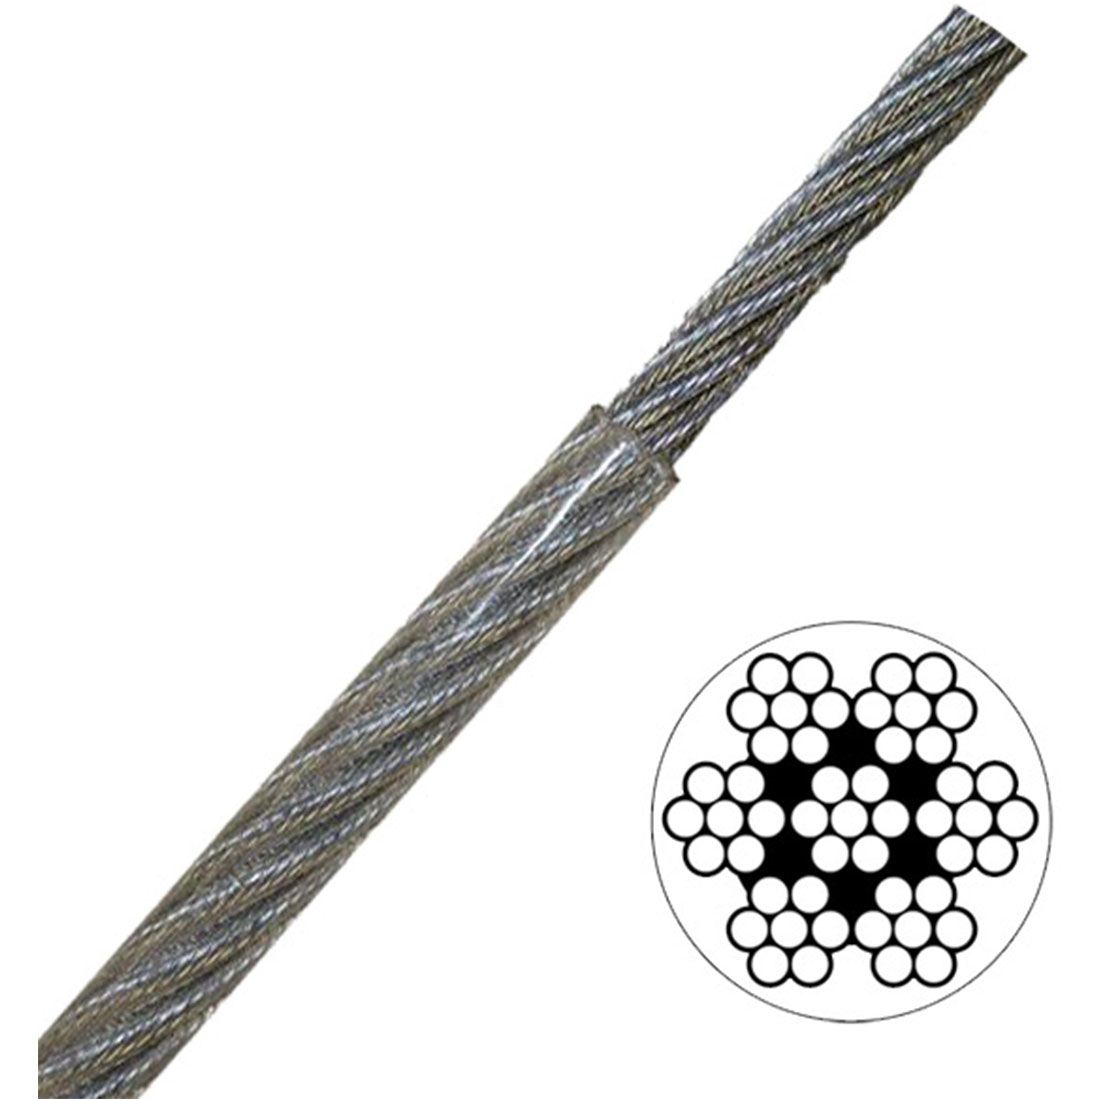 Reels 250' 3/32" x 1/8" Vinyl Coated Galvanized Aircraft Cable 7x7 